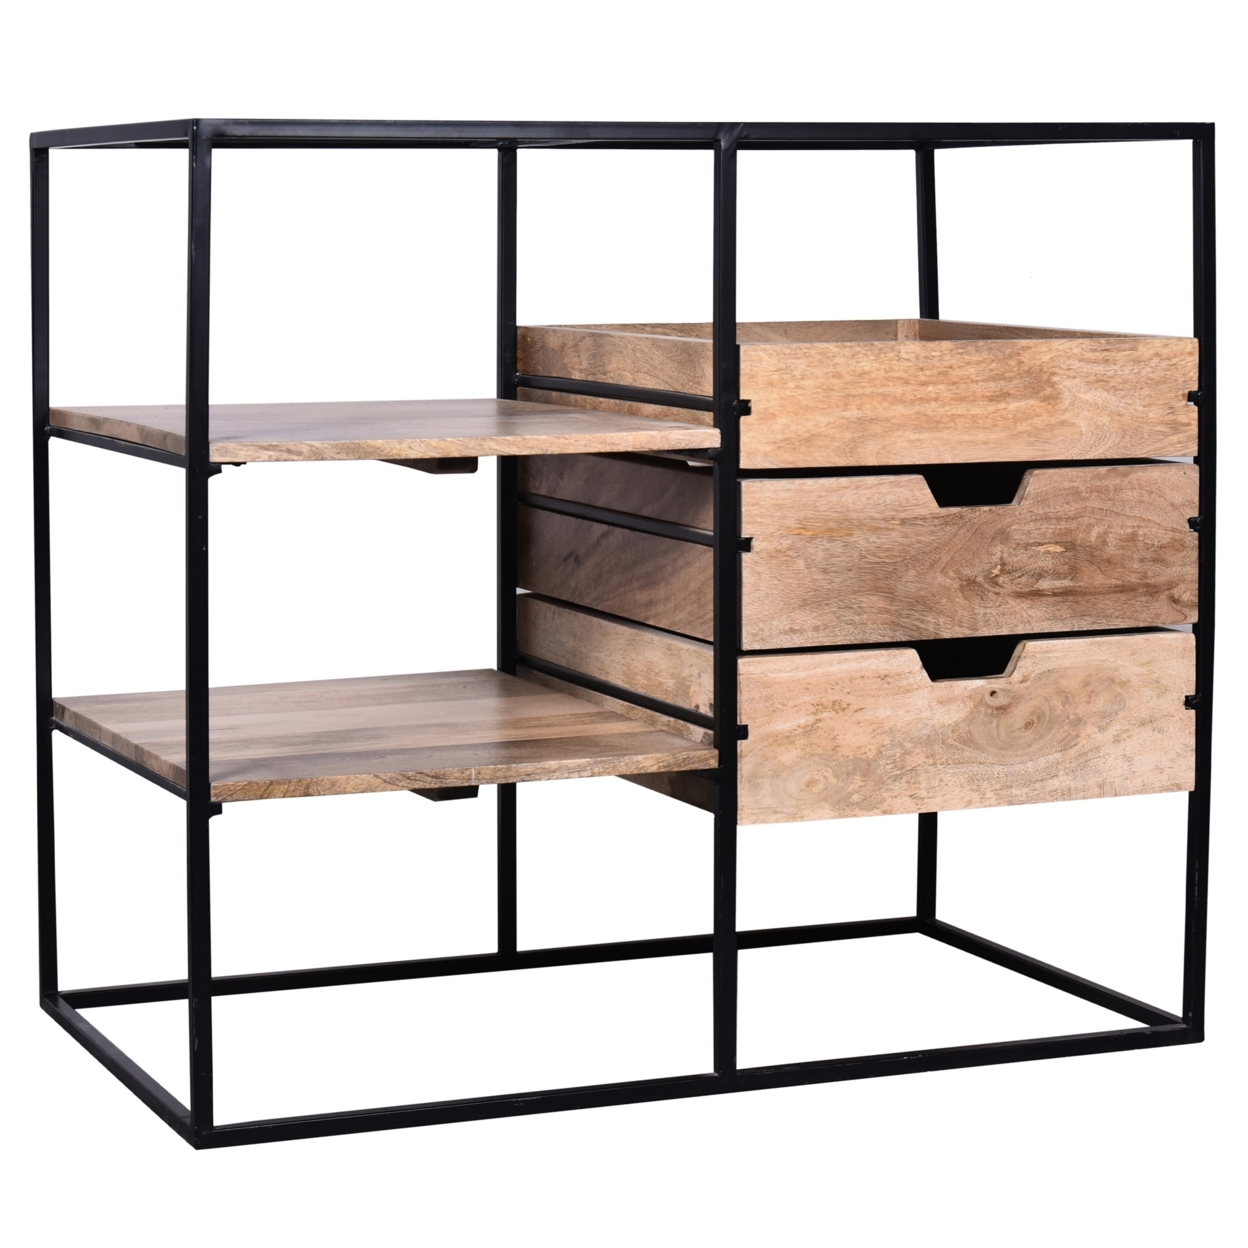 35 Inch Handcrafted Modern Glass Table, Storage Shelves, 3 Drawers, Metal Frame, Natural Brown And Black- Saltoro Sherpi